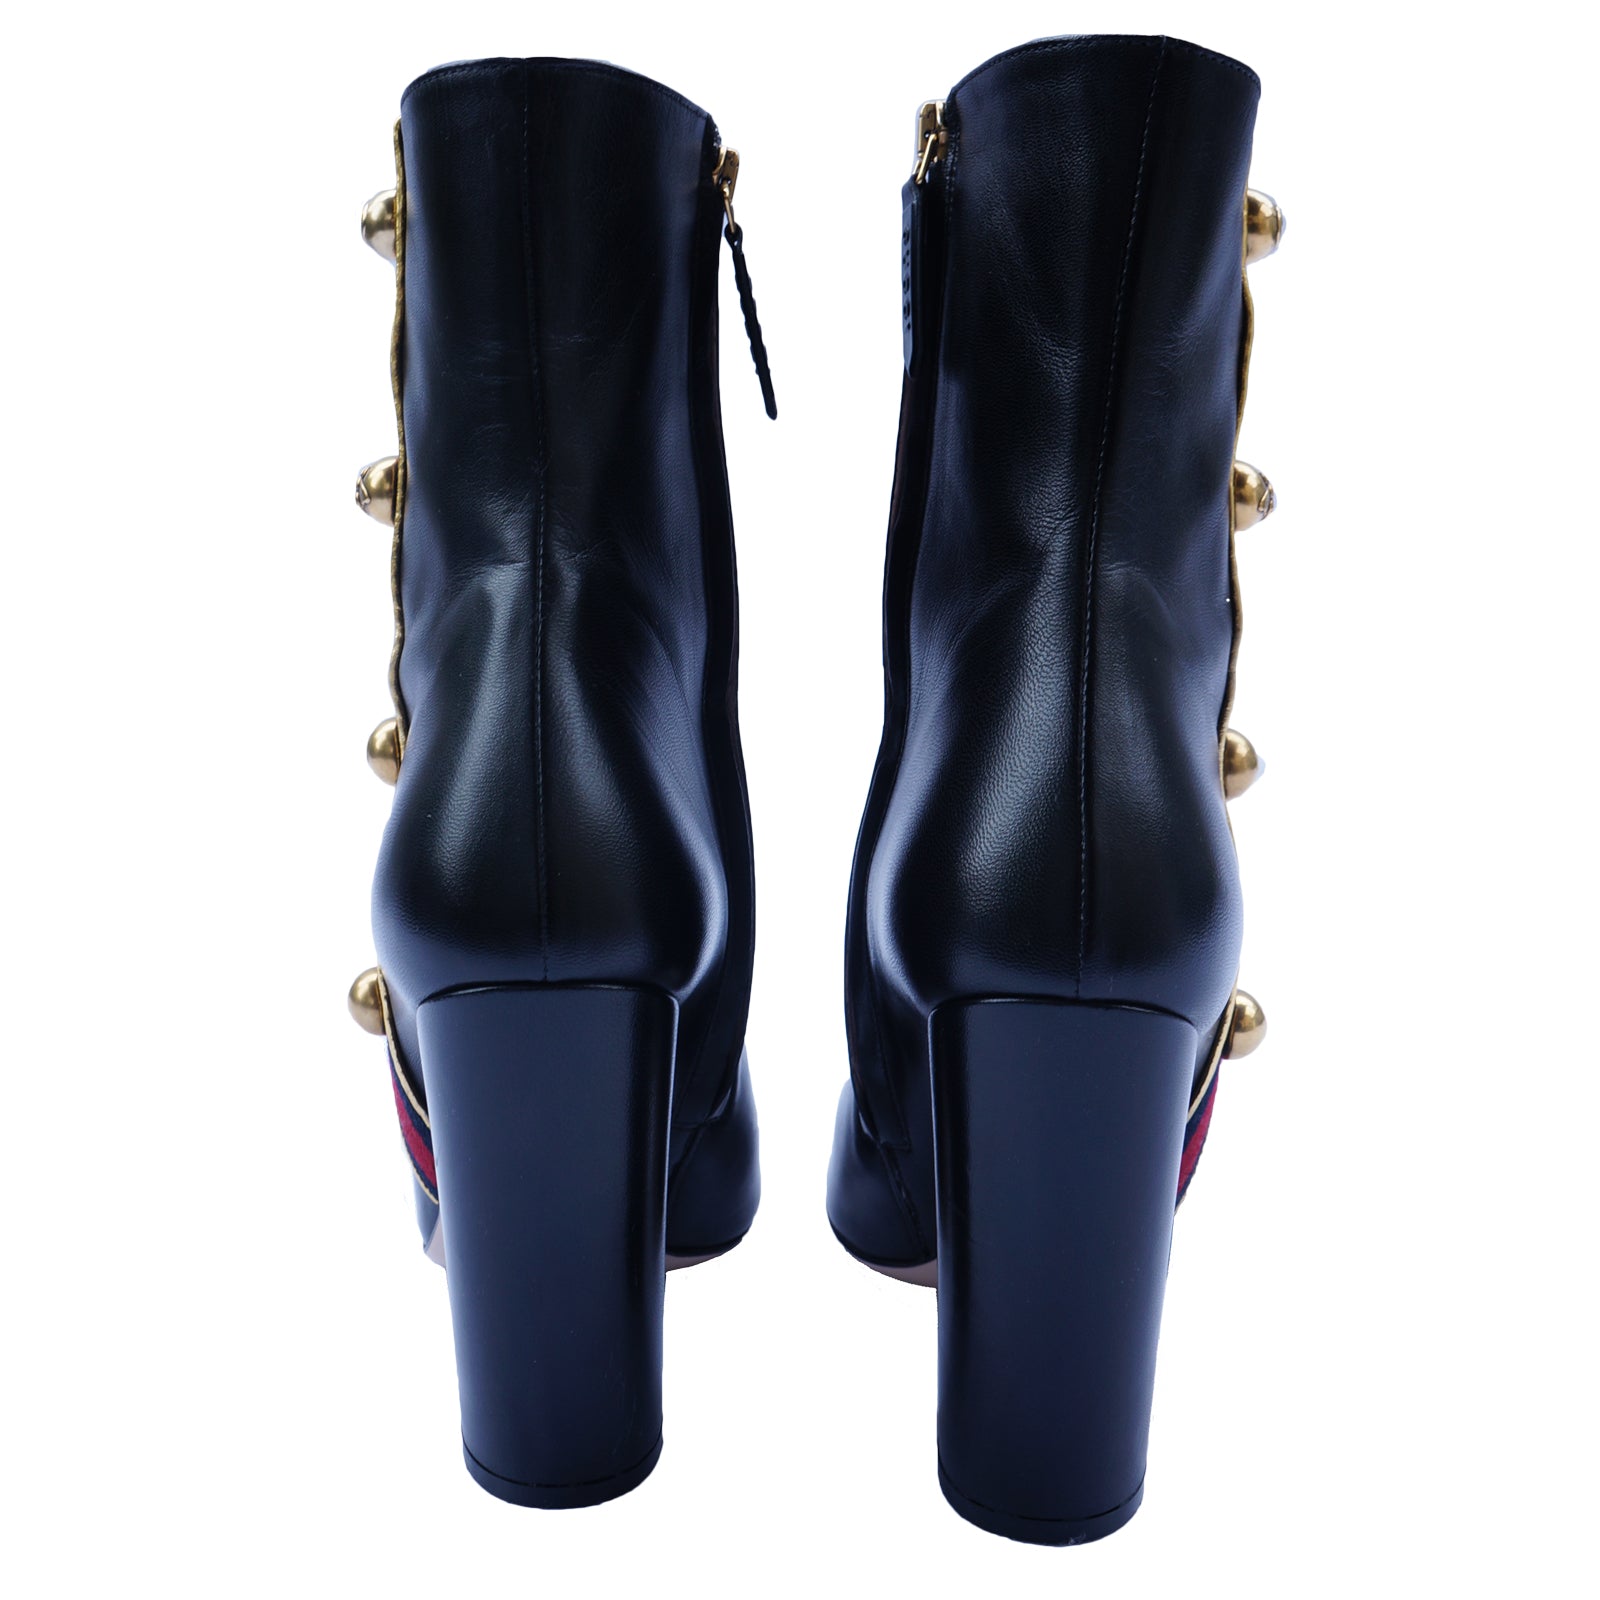 GUCCI CARLY LEATHER STUDDED GROSGRAIN TRIM BOOTS – literacybasics.ca